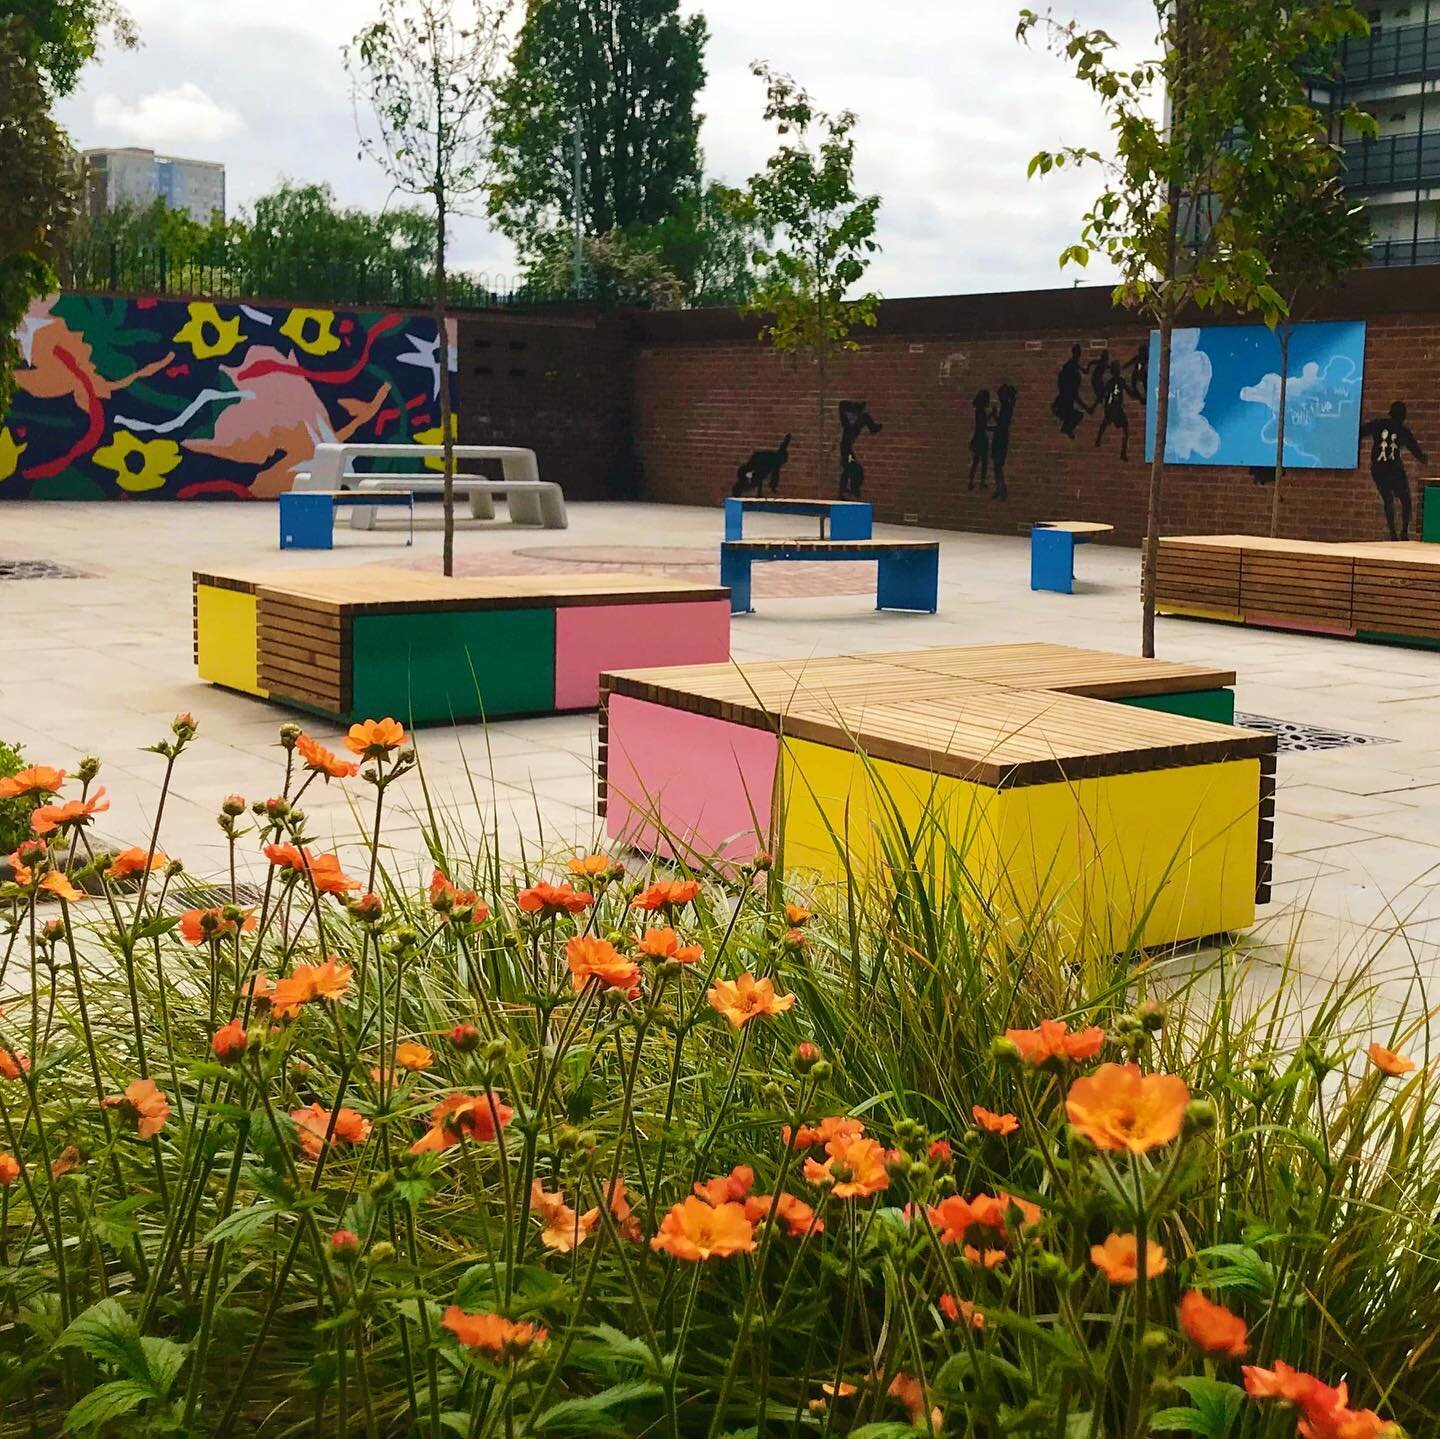 🗓️2 Years ago we began work on a disused playground in Lincoln Green. 

Last year saw the first stage of the Roxby Community Garden transformation with the site being cleared, cleaned and the plant beds prepared for planting. 

The garden redesign, 